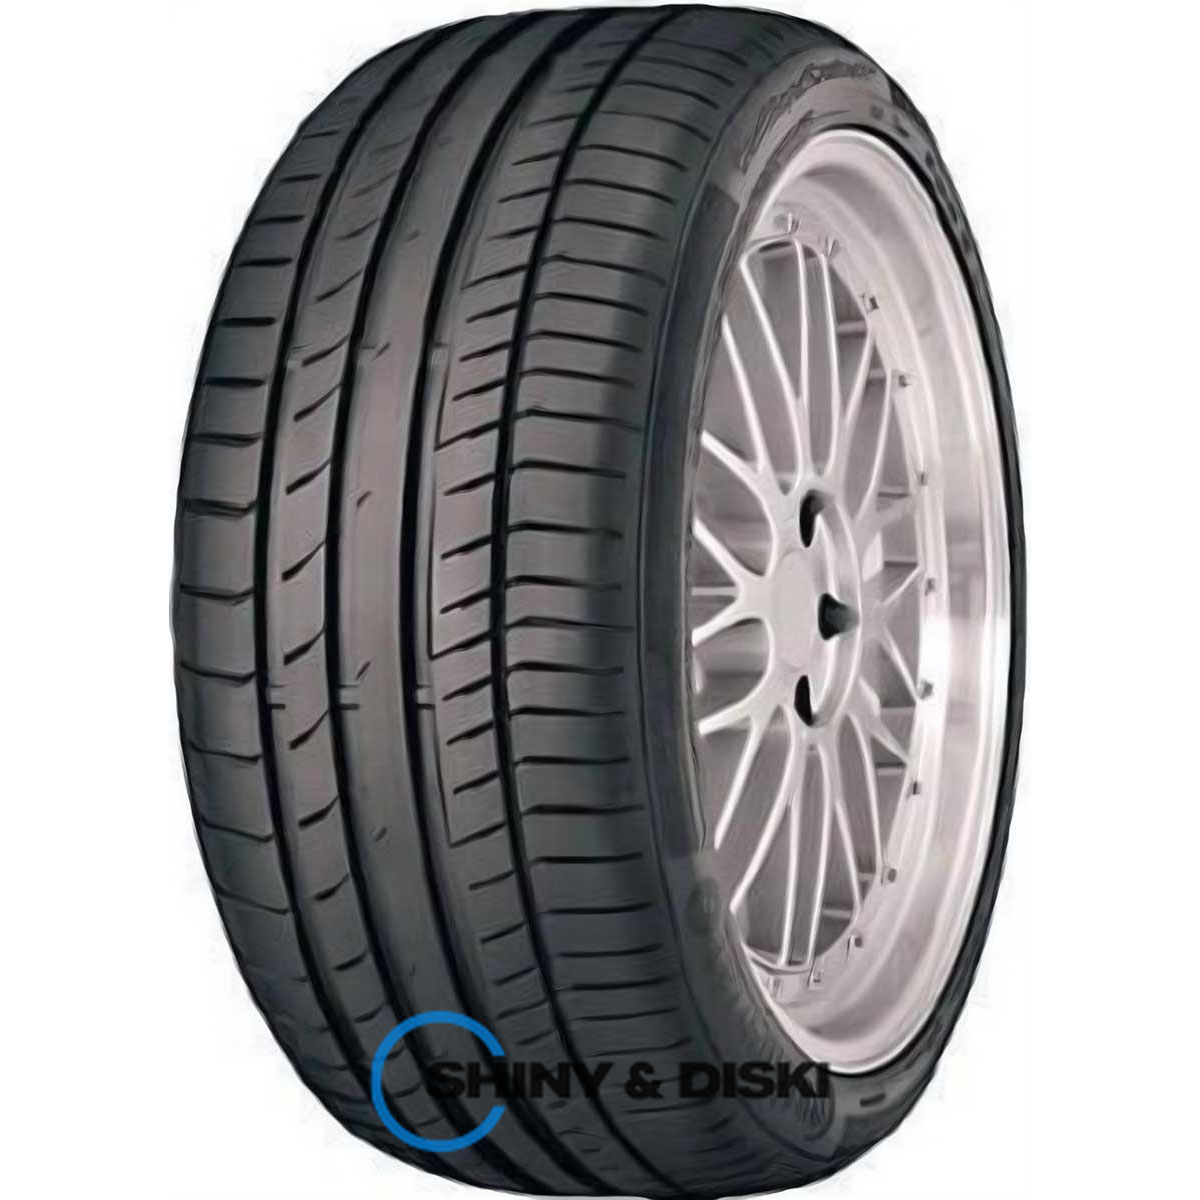 continental sportcontact 5p 285/35 r20 104y mo